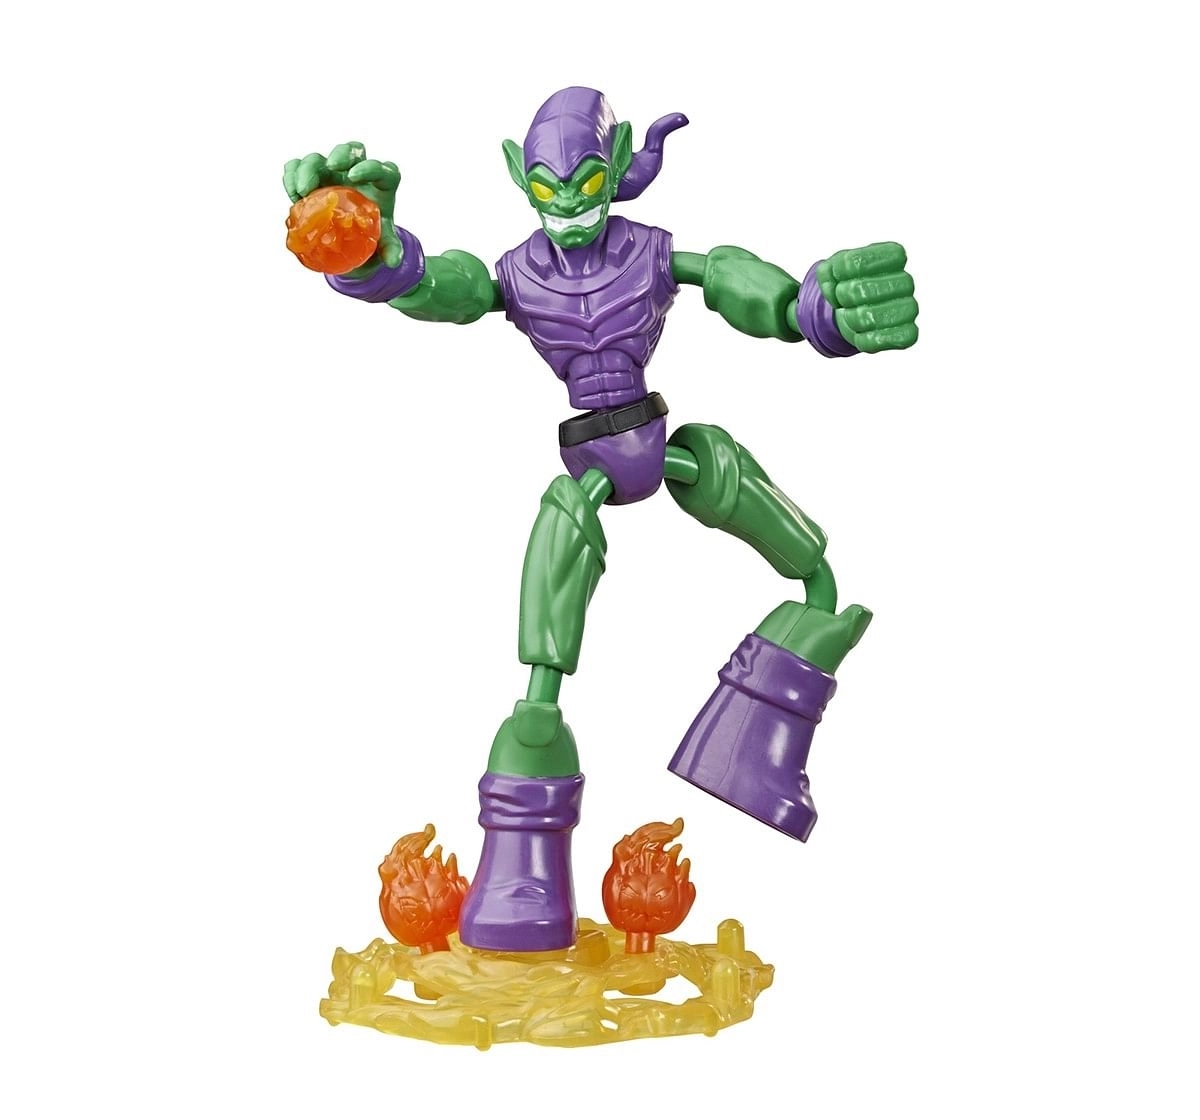 Marvel Spider-Man Bend and Flex Green Goblin Action Figure Toy, 6-Inch Flexible Figure, Includes Blast Accessories, For Kids Ages 4 And Up 